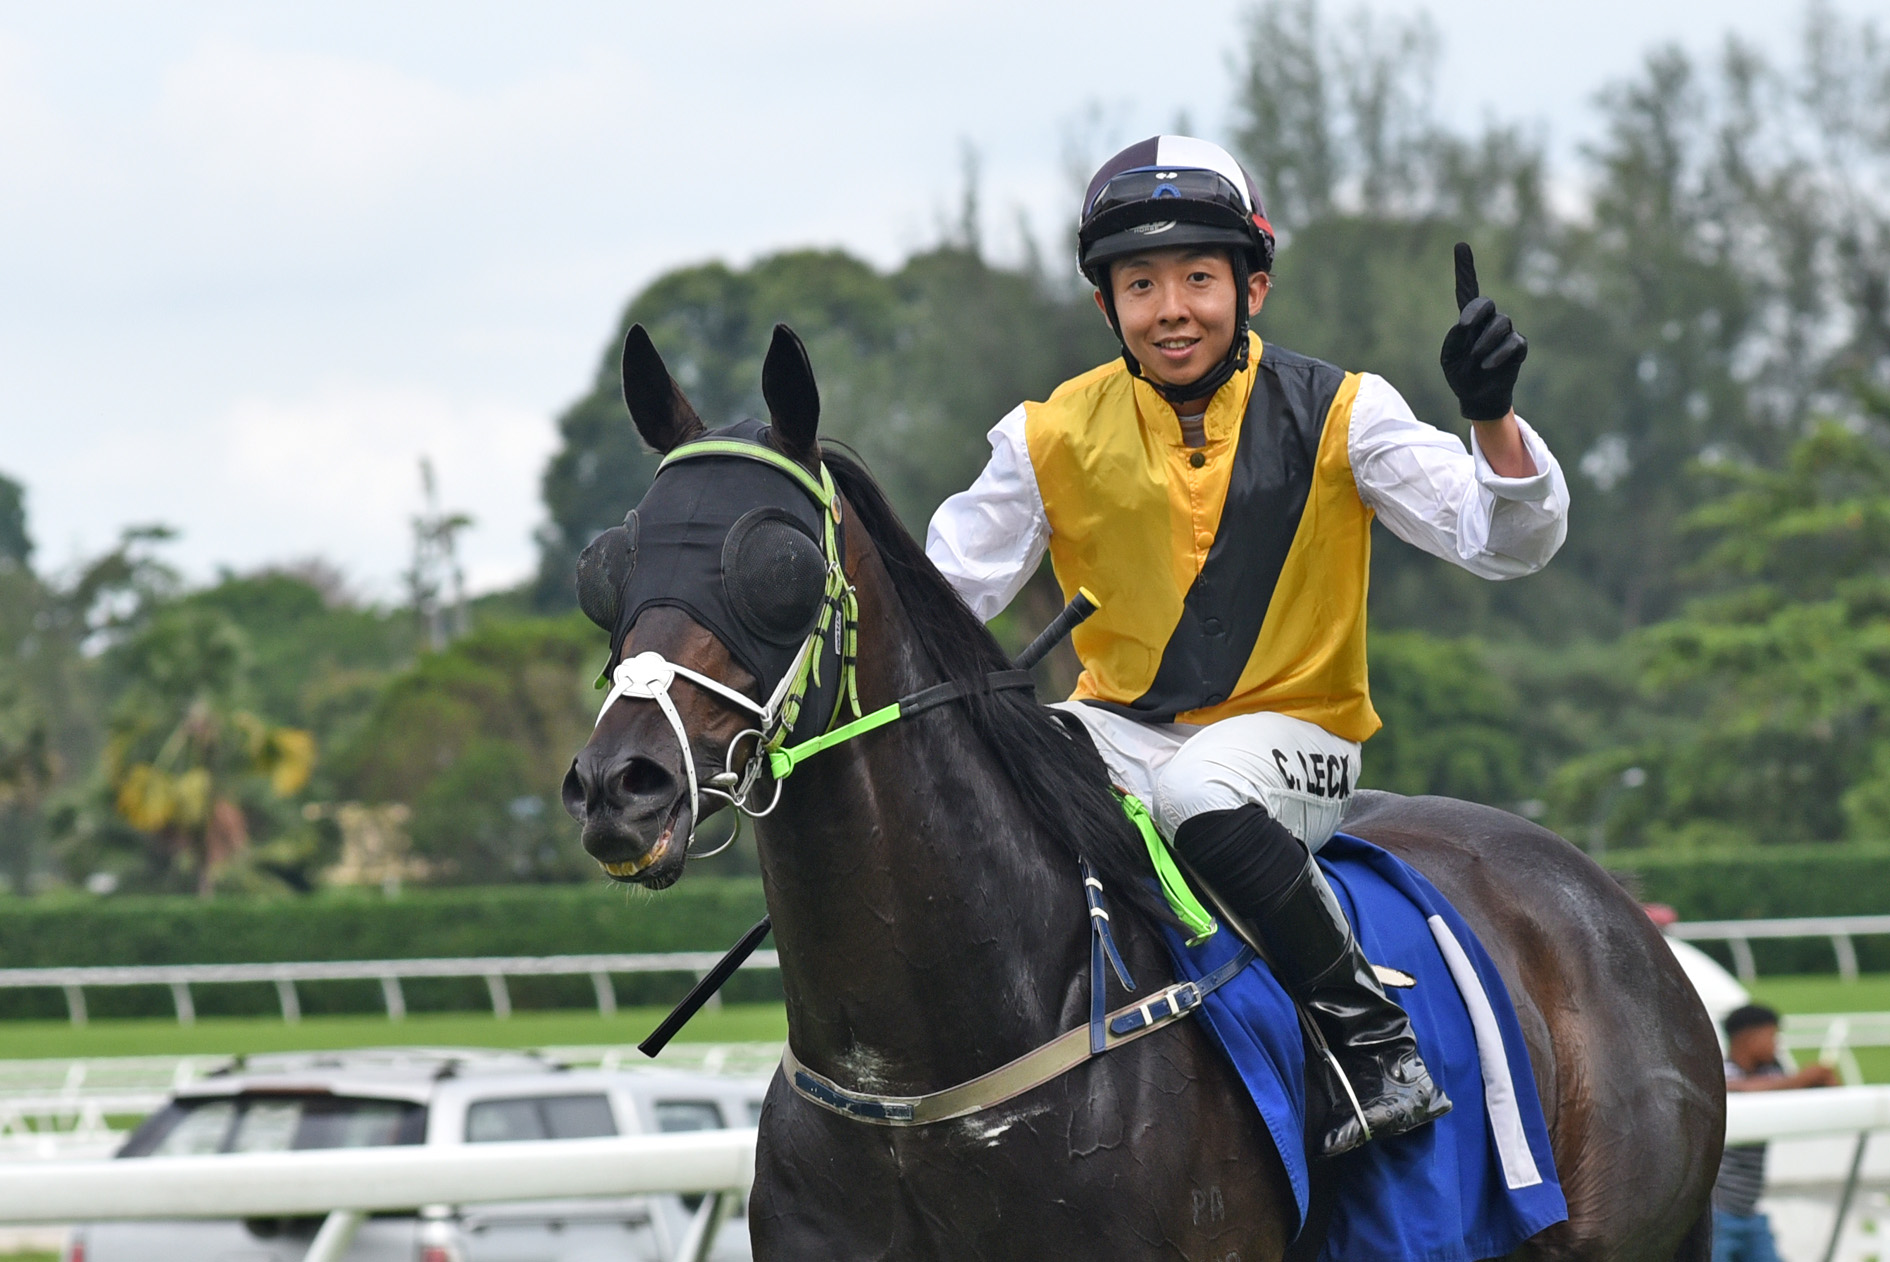 Awesome Storm bounces back to his best | Selangor Turf Club